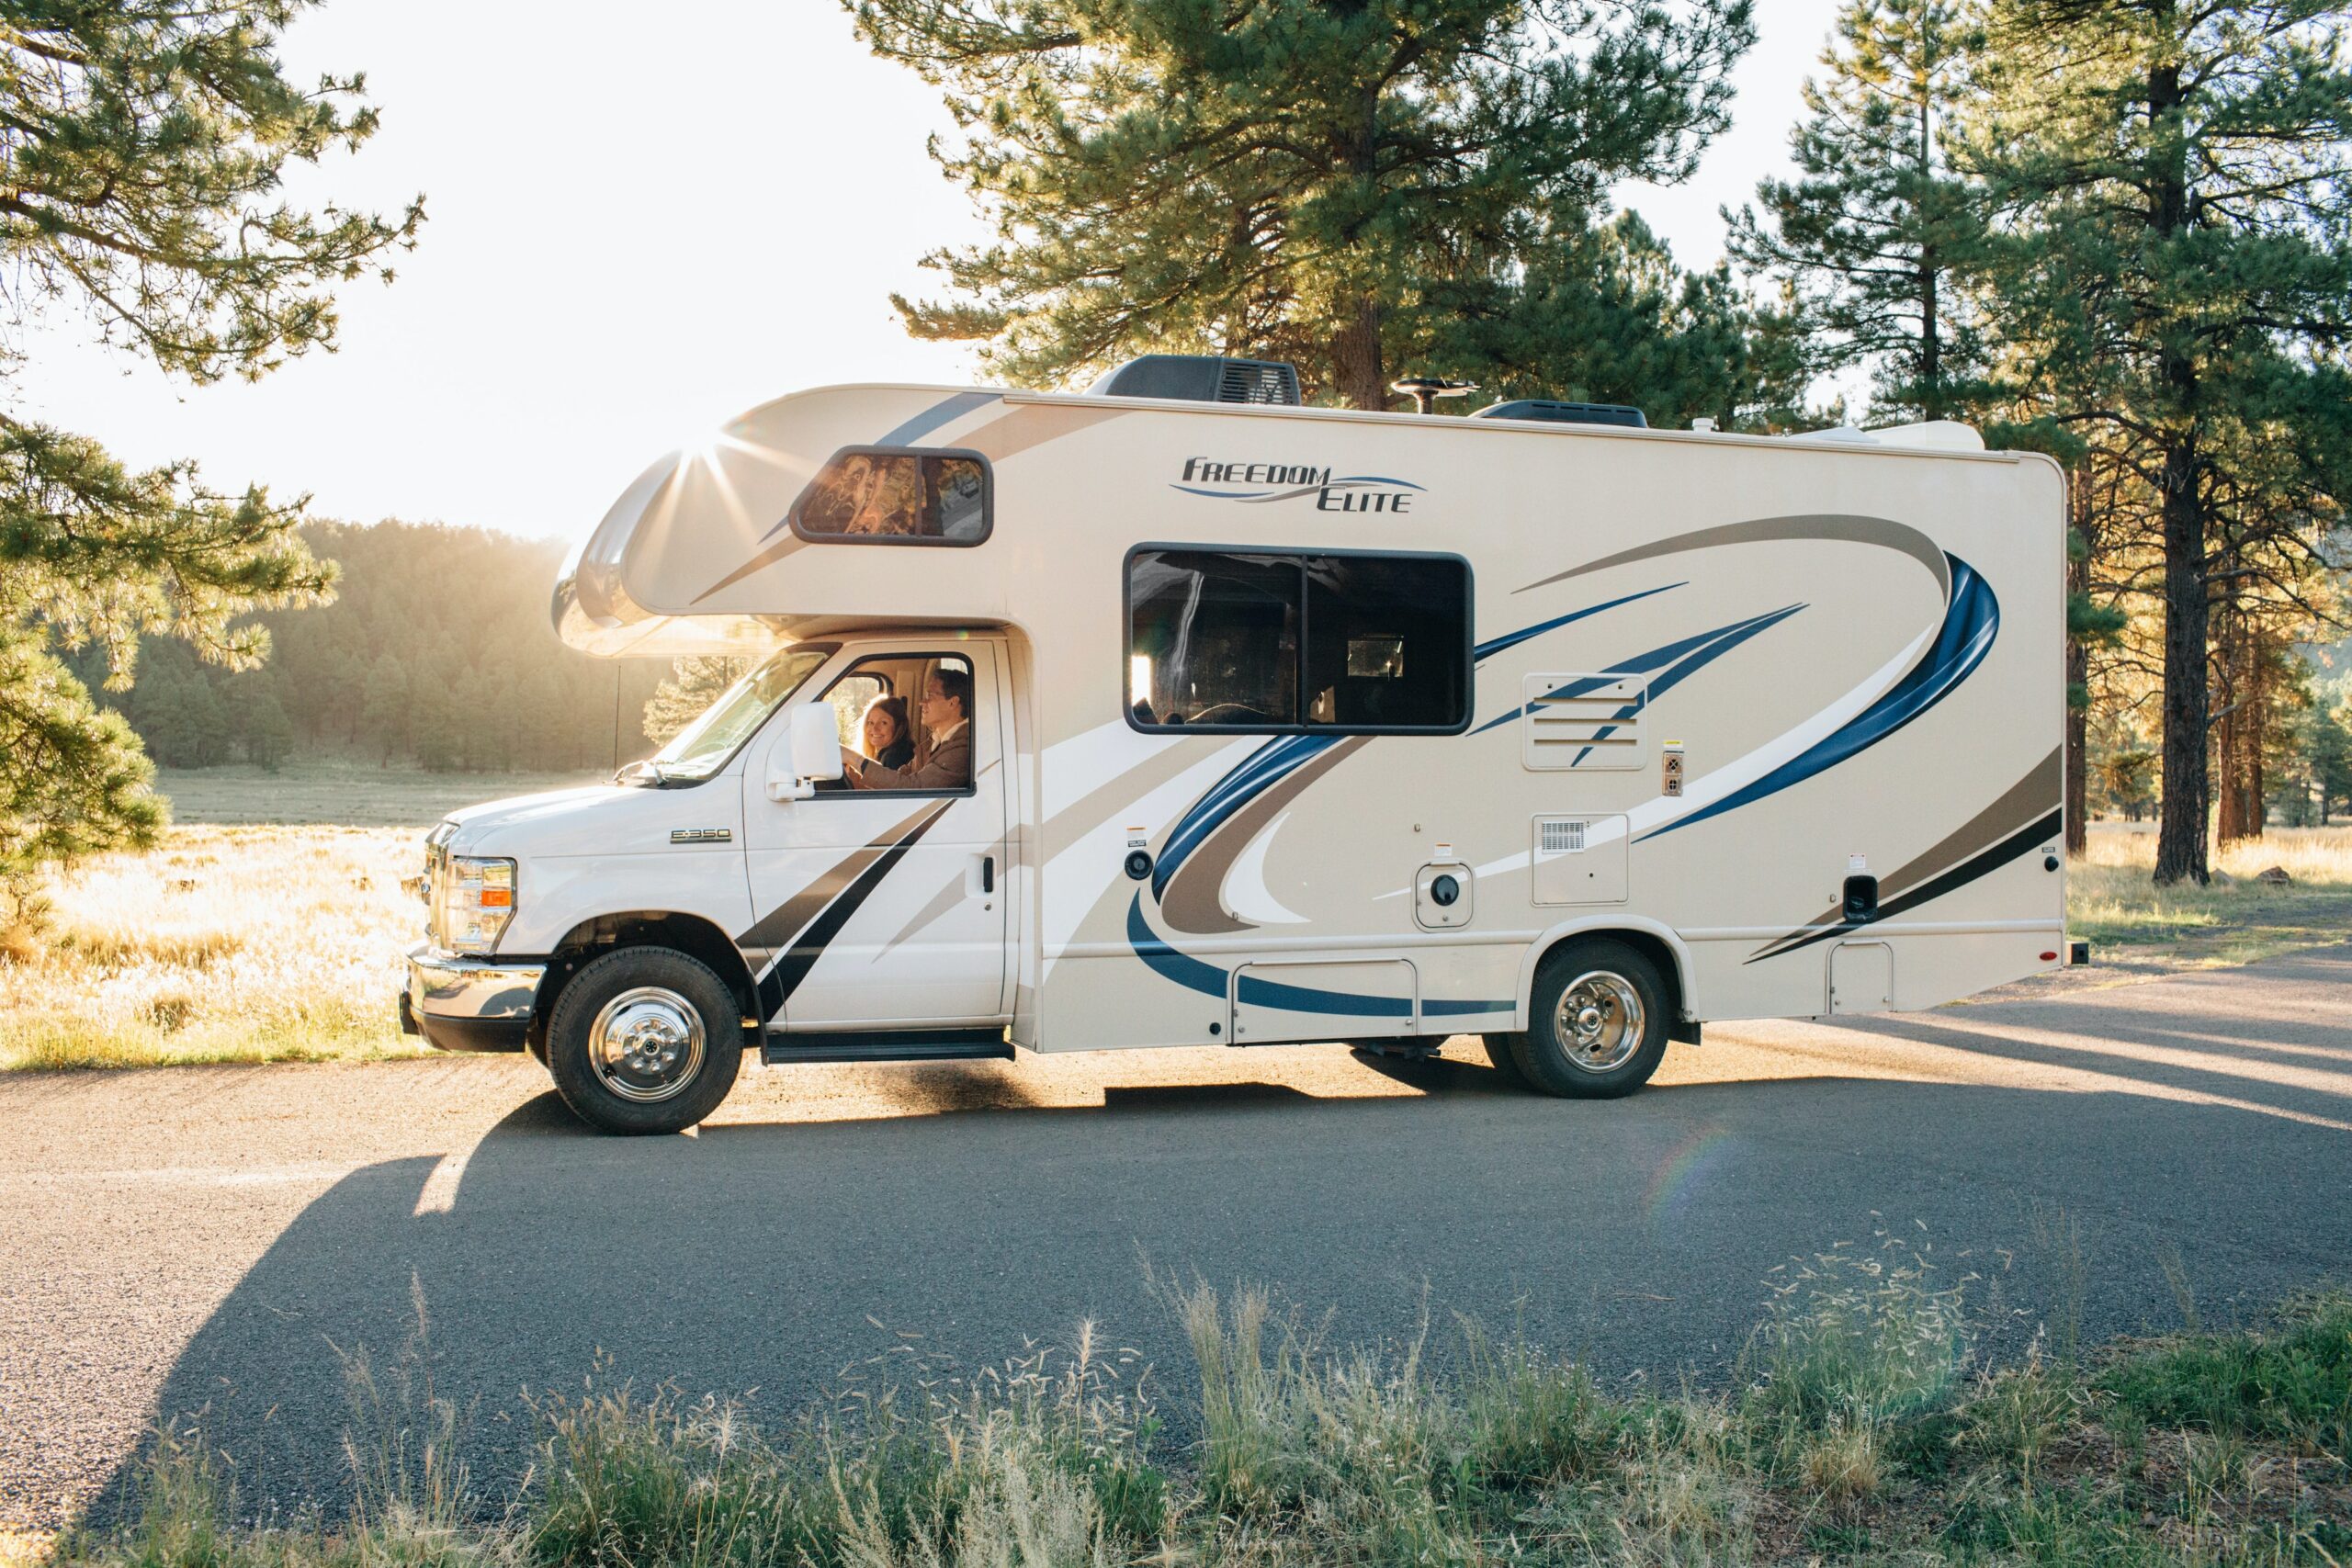 Not Convinced Yet? Here’s Why RV Travel is Here to Stay